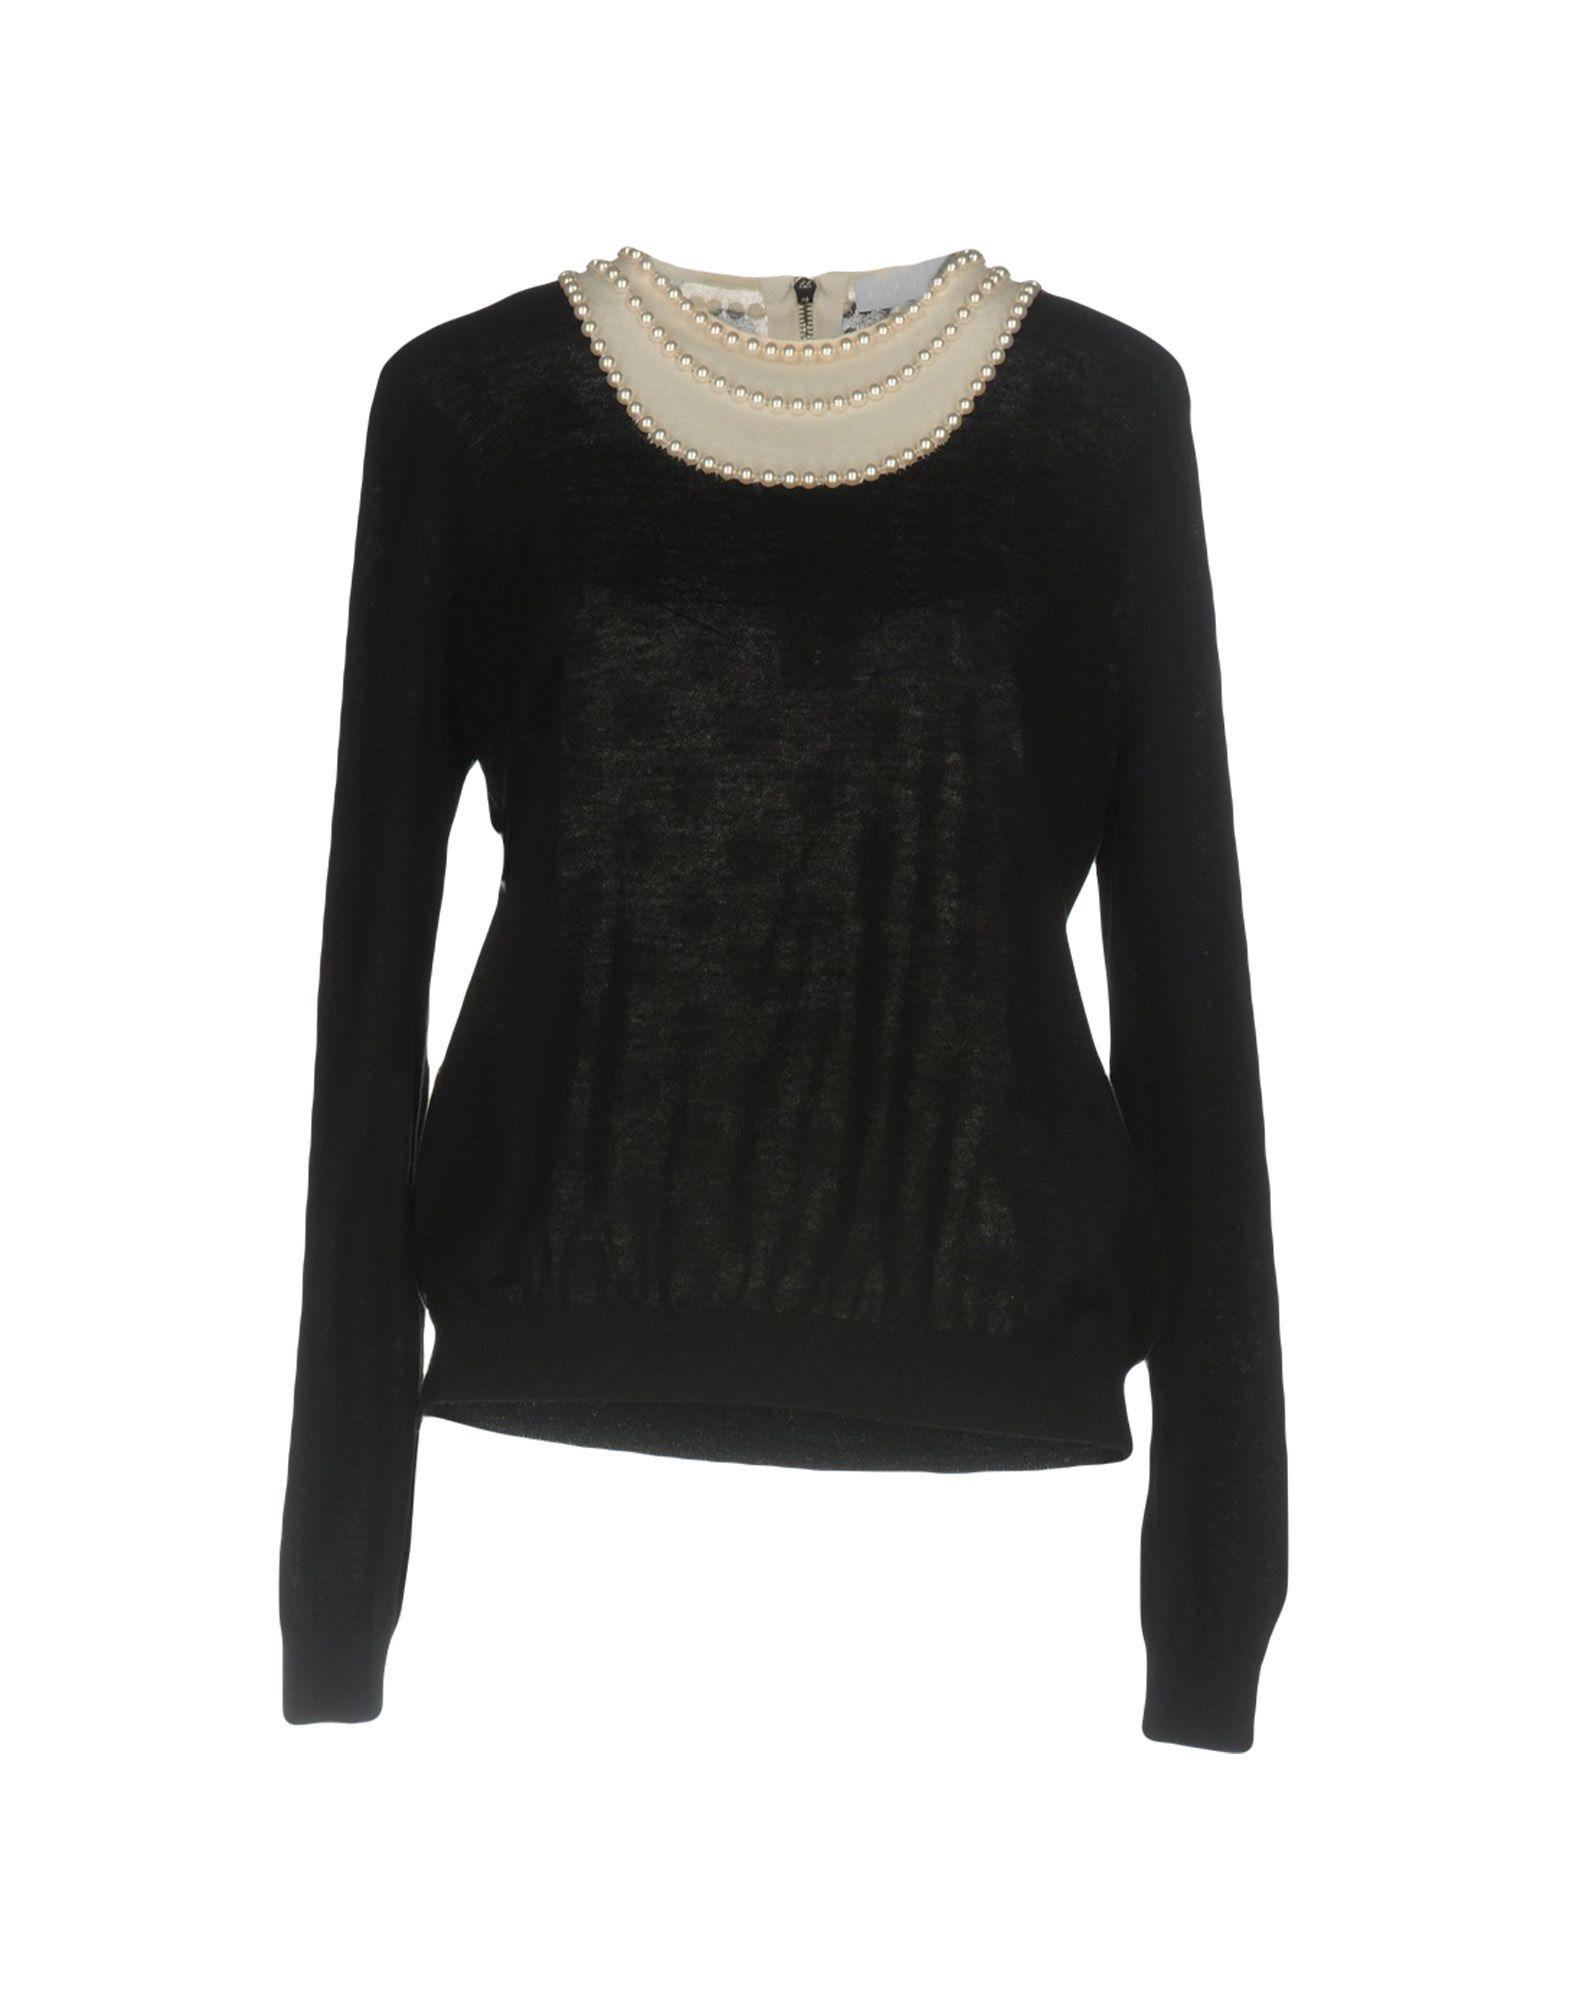 Moschino Cheap And Chic Sweater In Black | ModeSens